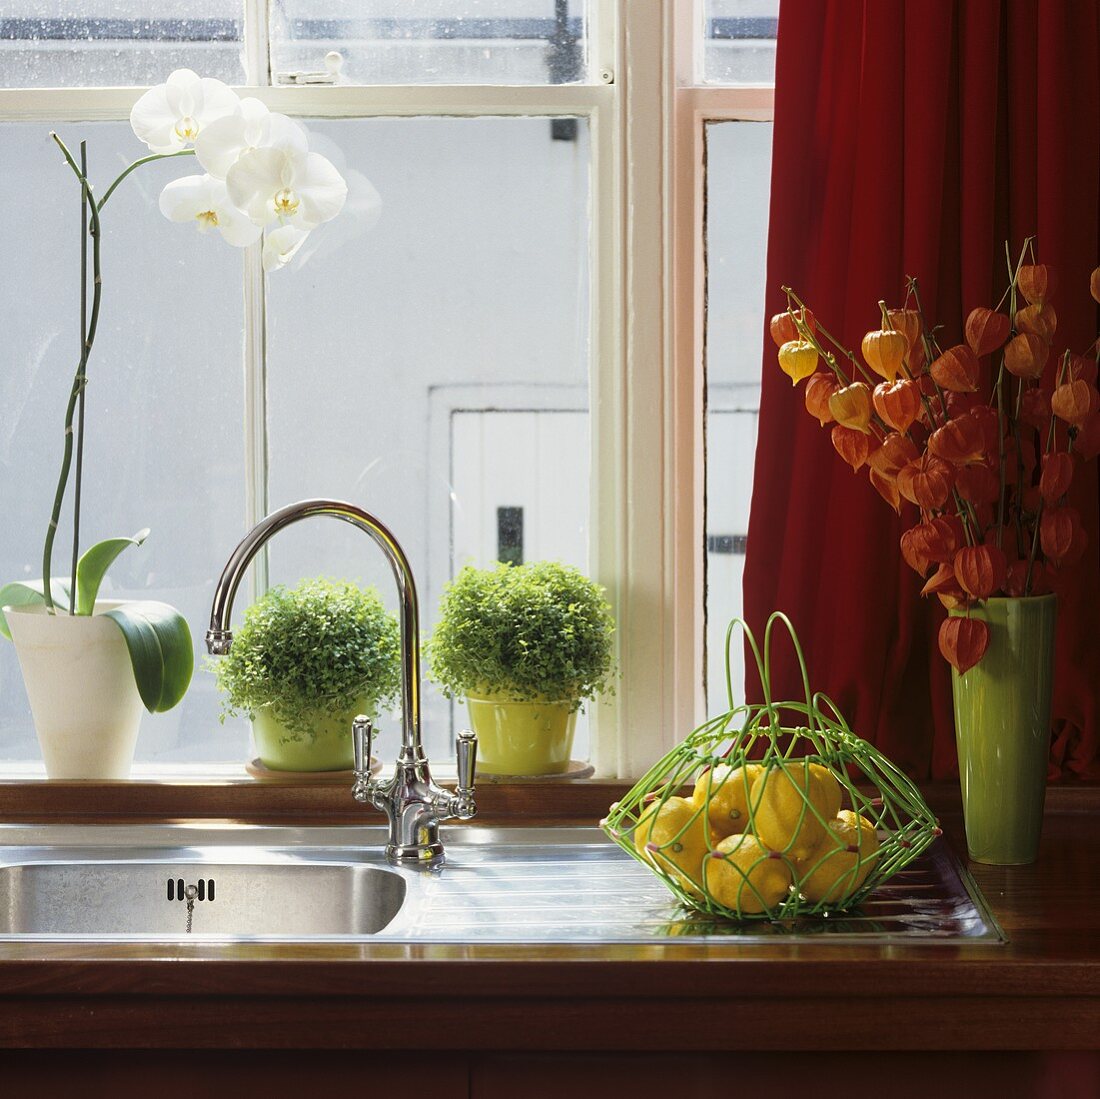 A stainless steel sink with vintage taps and pots of herbs on the window sill